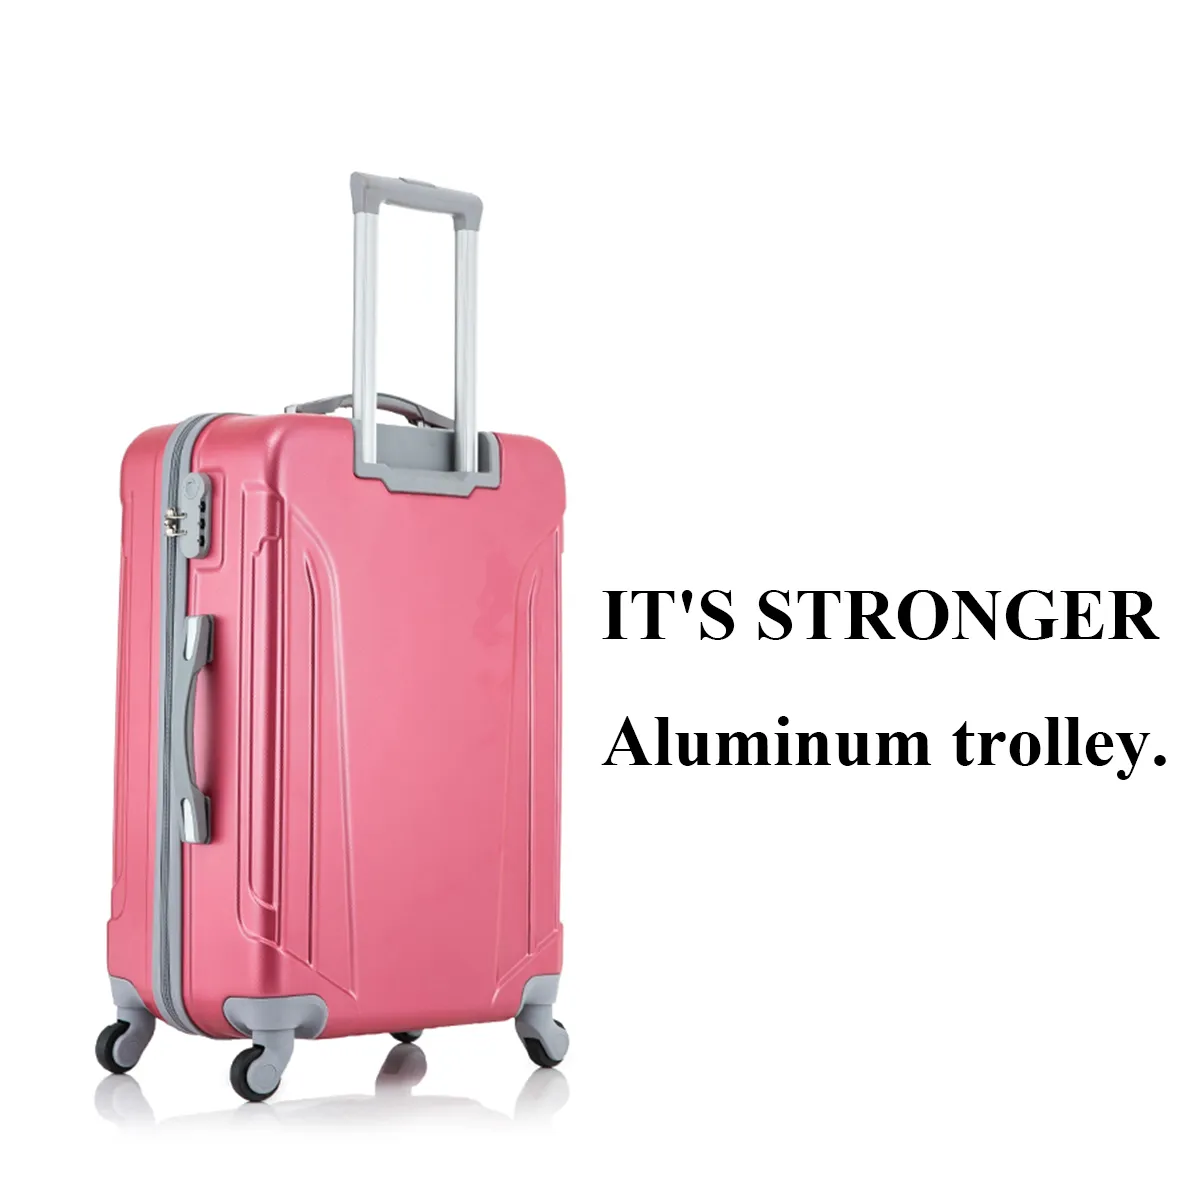 FASHION ABS HARD SHELL SUITCASE SPINNER TRAVEL BAGS LUGGAGE SETS TROLLEY